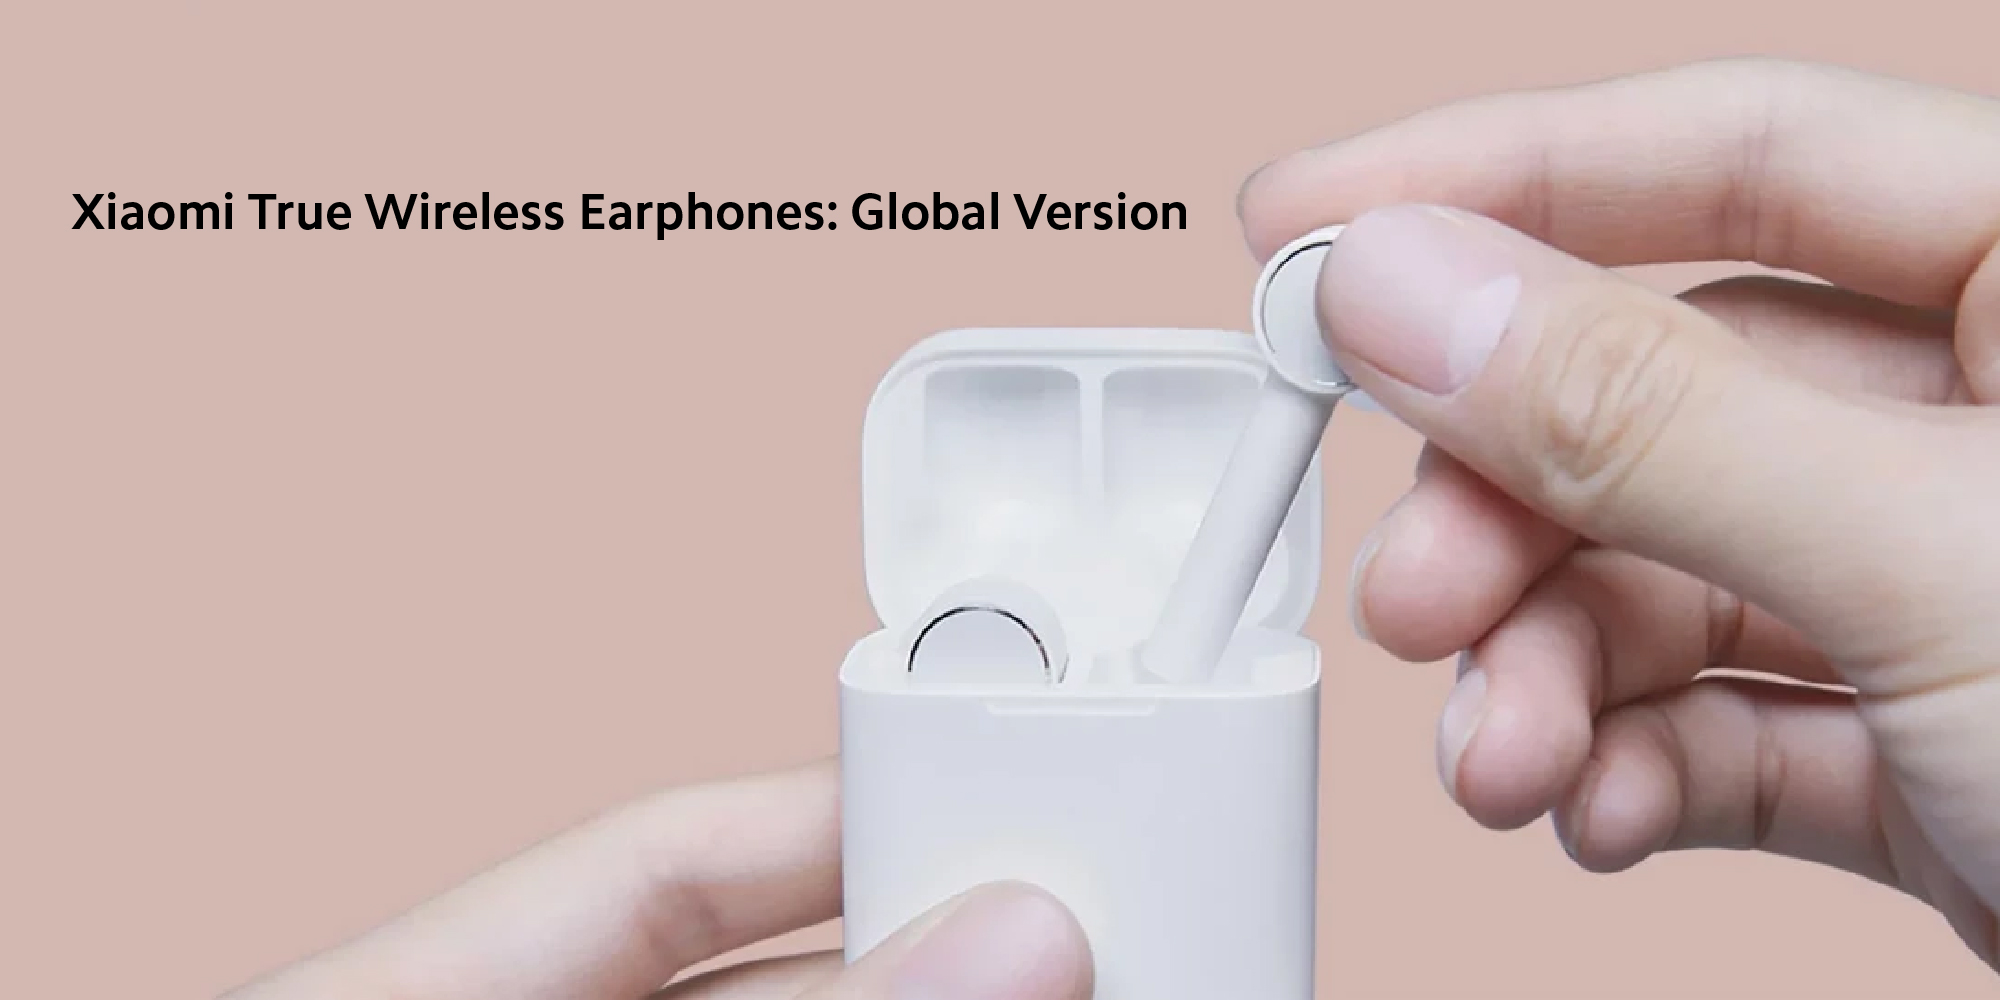 Xiaomi True Wireless Earphones: Global Version -White: Up to 12 Hours Long Battery Life, Bluetooth 5.0, IPX4 Water Resistance